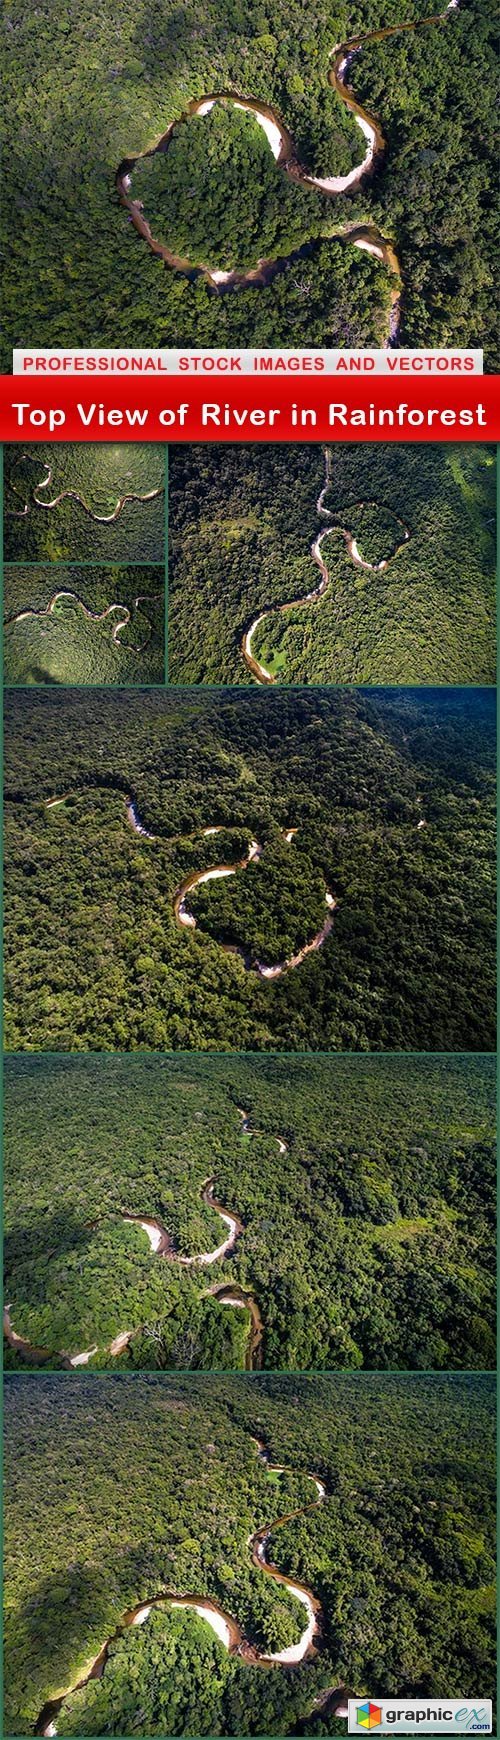 Top View of River in Rainforest - 7 UHQ JPEG